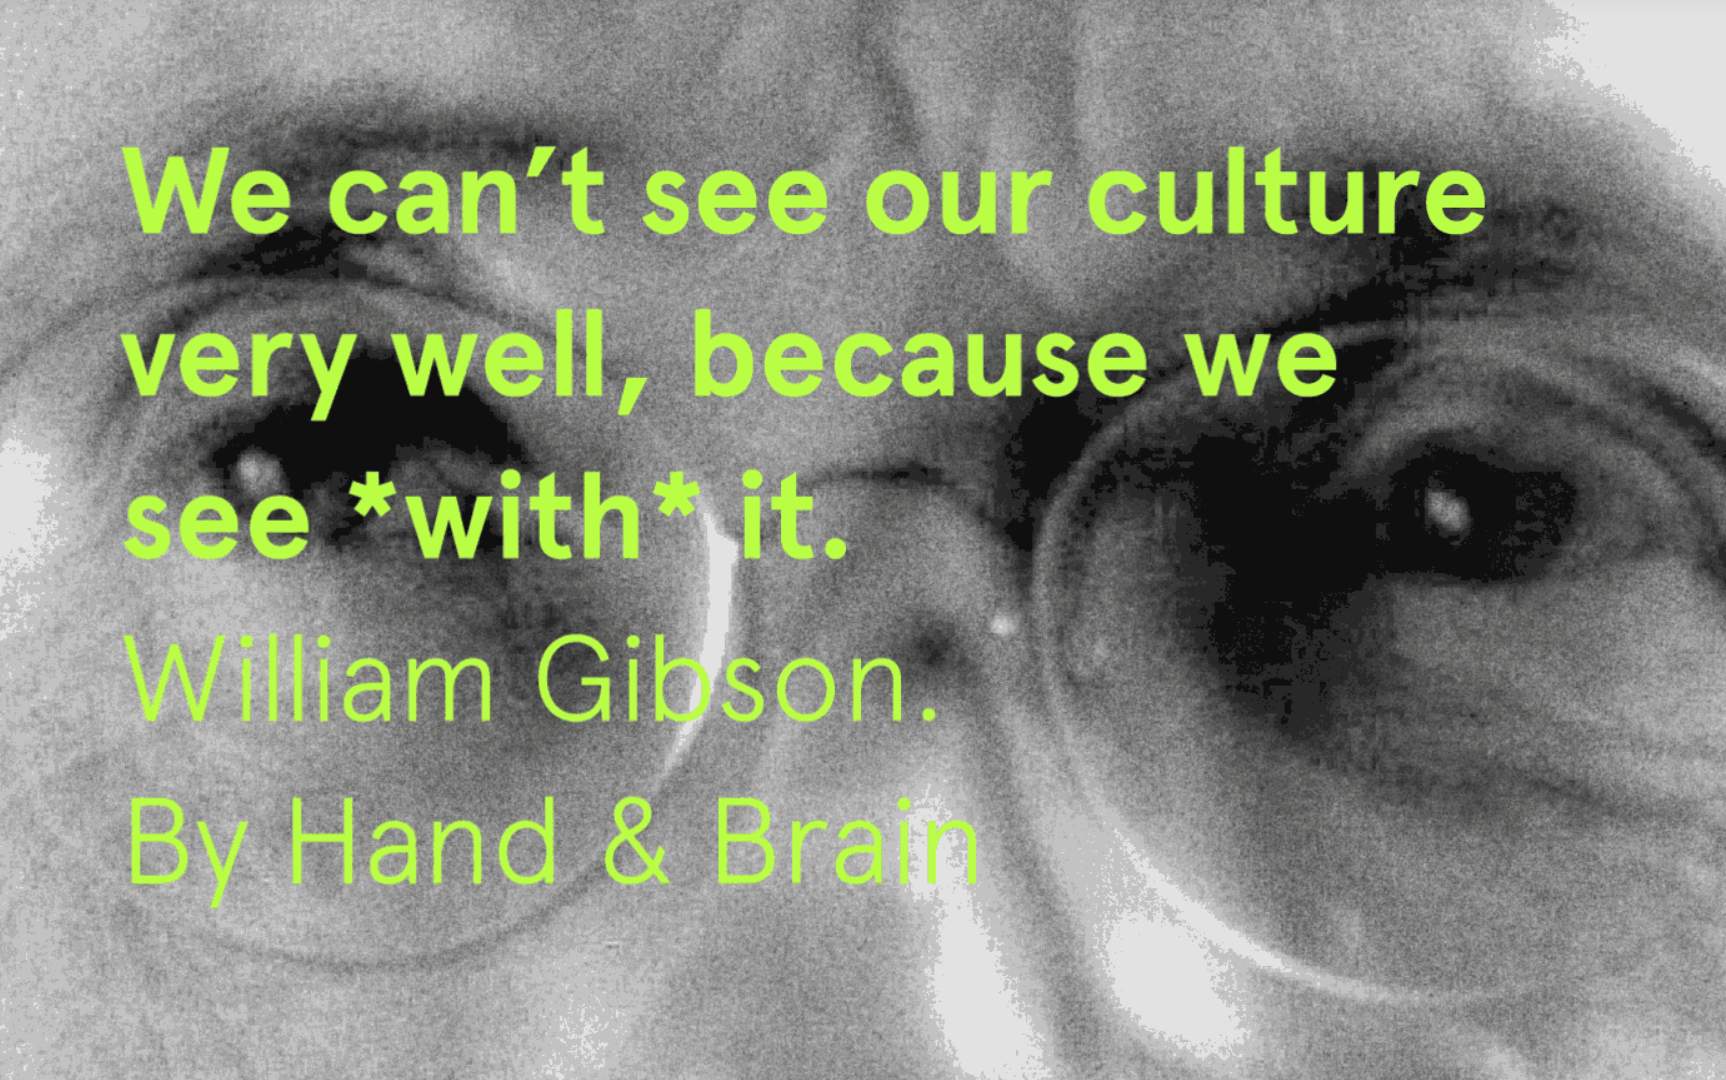 We can't see our culture very well, because we see with it. William Gibson